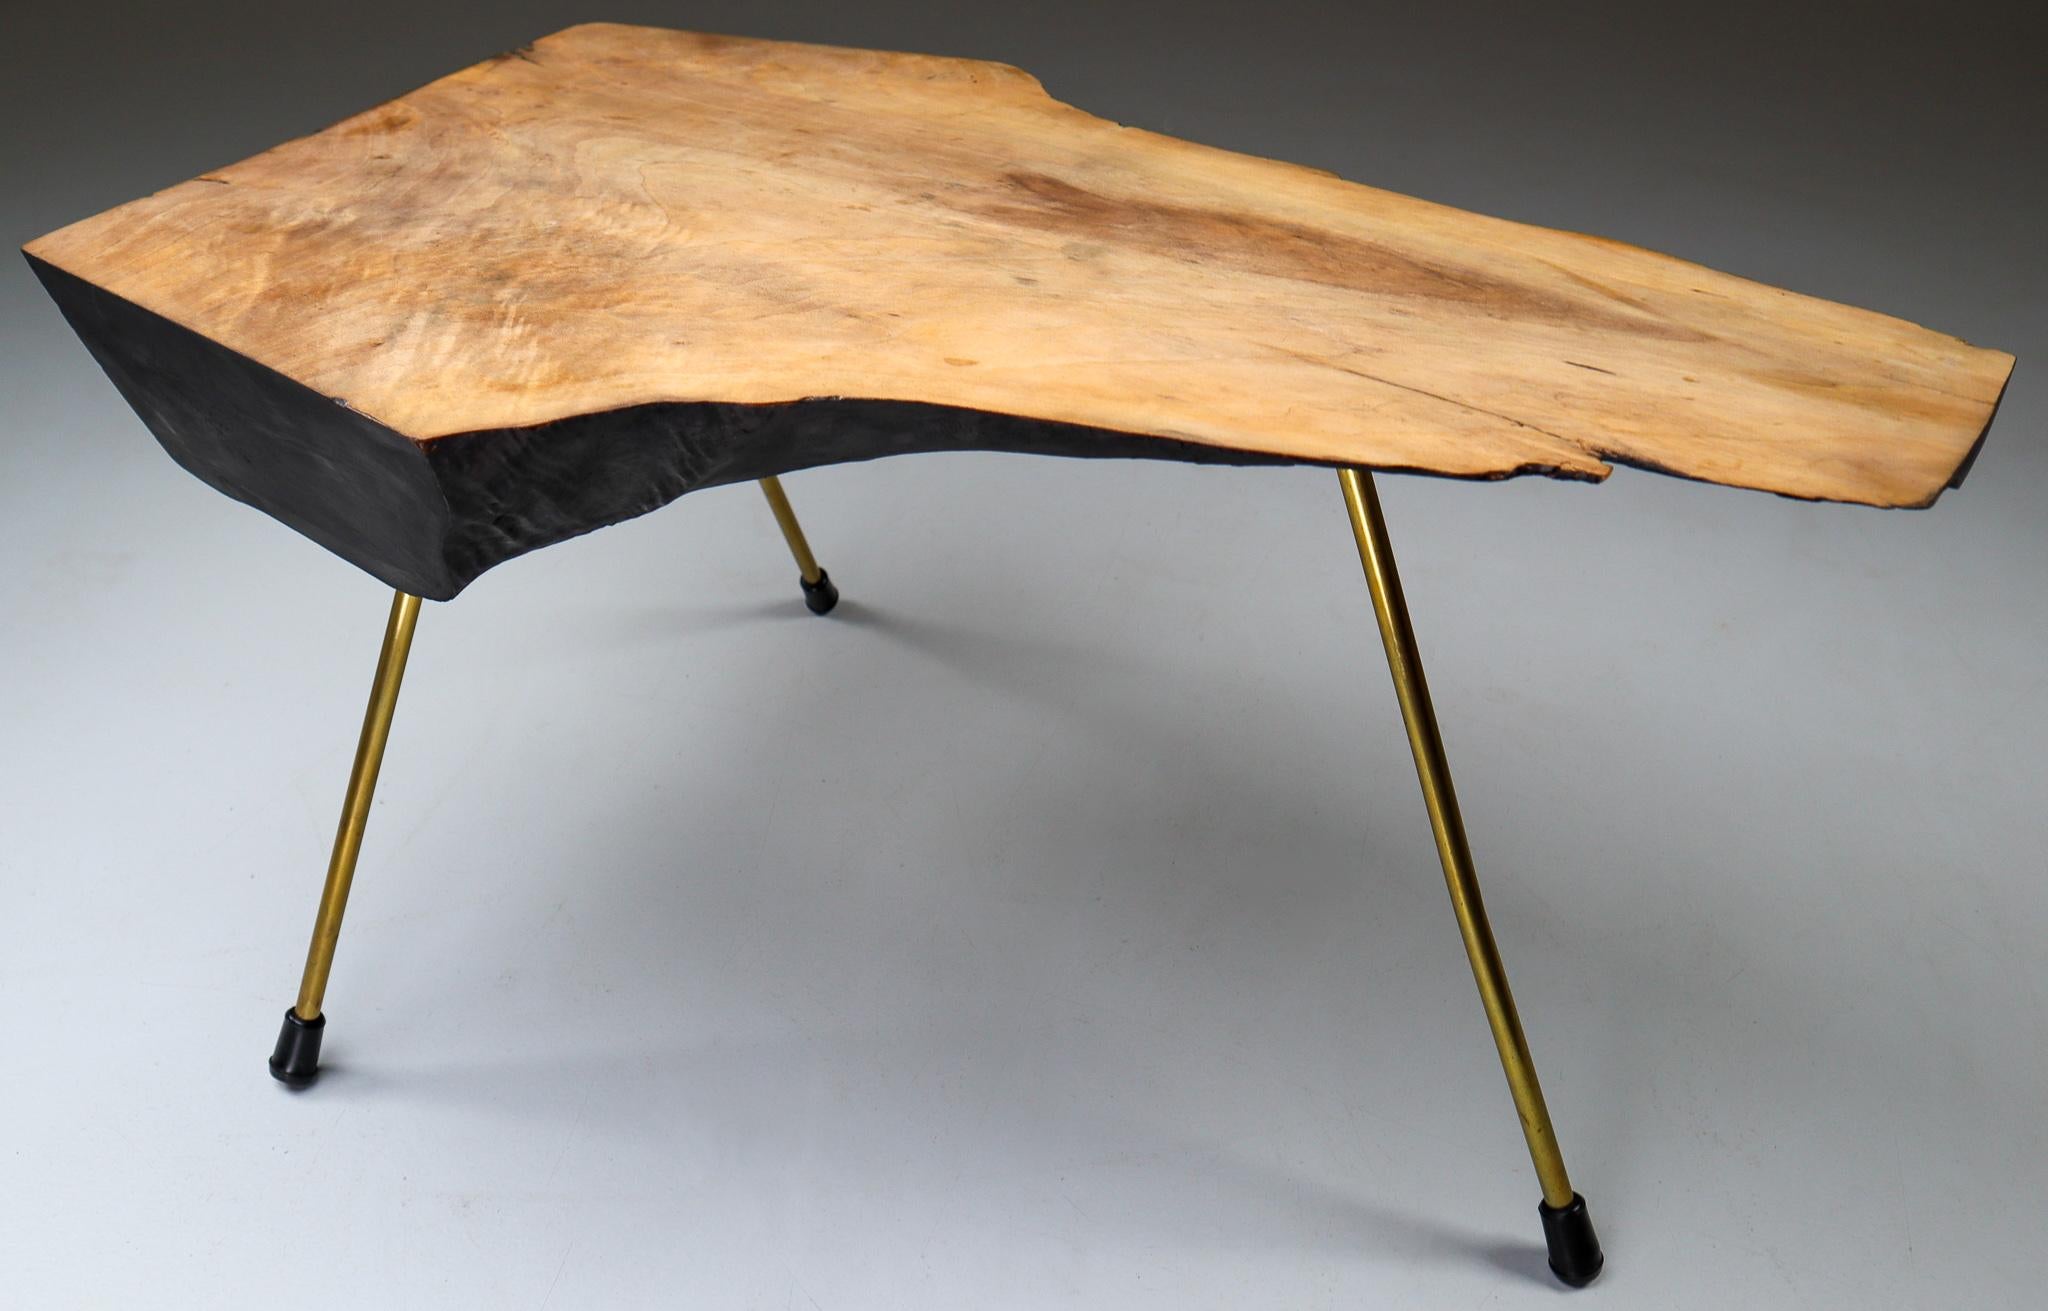 A sculptural tree trunk coffee table by Austrian designer Carl Auböck II (often simply referred to as Carl Auböck), from circa 1950s. A large tree trunk table designed and made by the Auböck Werkstätte, circa 1950s. The modernist table is made of